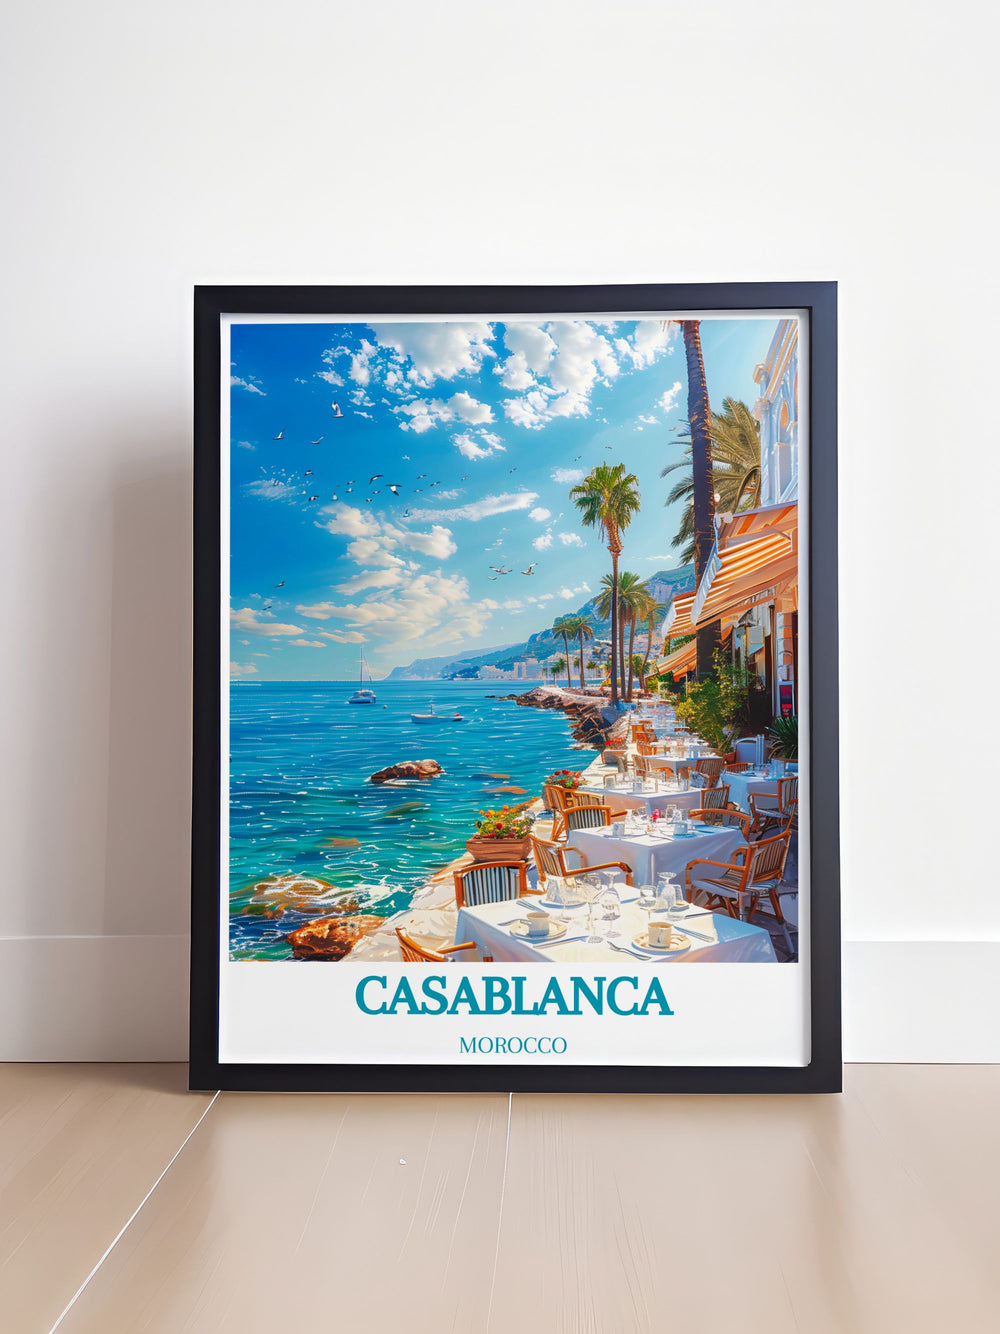 The picturesque scenery of Casablanca with Corniche Ain Diab as a focal point is featured in this vibrant travel poster, perfect for adding Moroccos unique charm to your home.